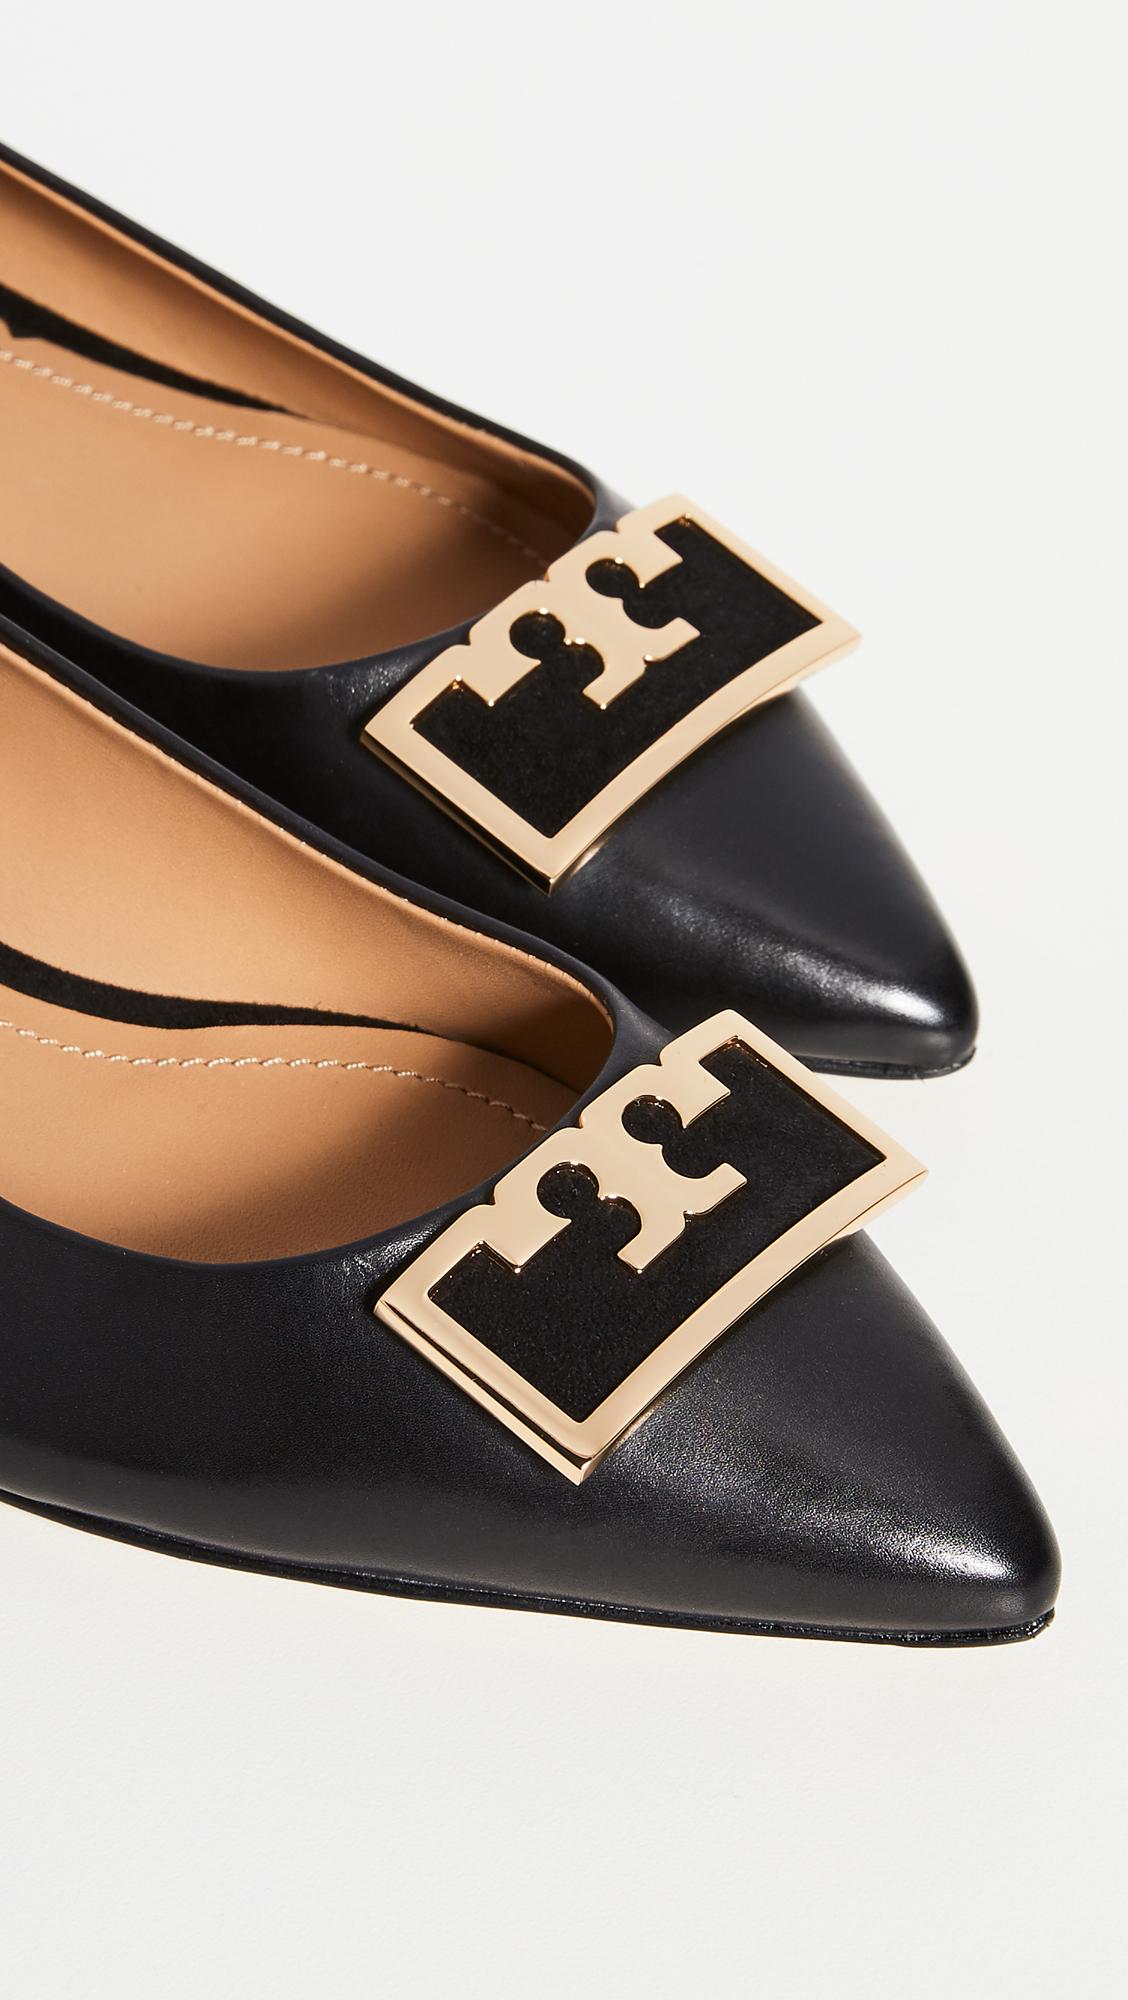 Tory Burch Leather Gigi Pointed Toe Flats in Black - Lyst